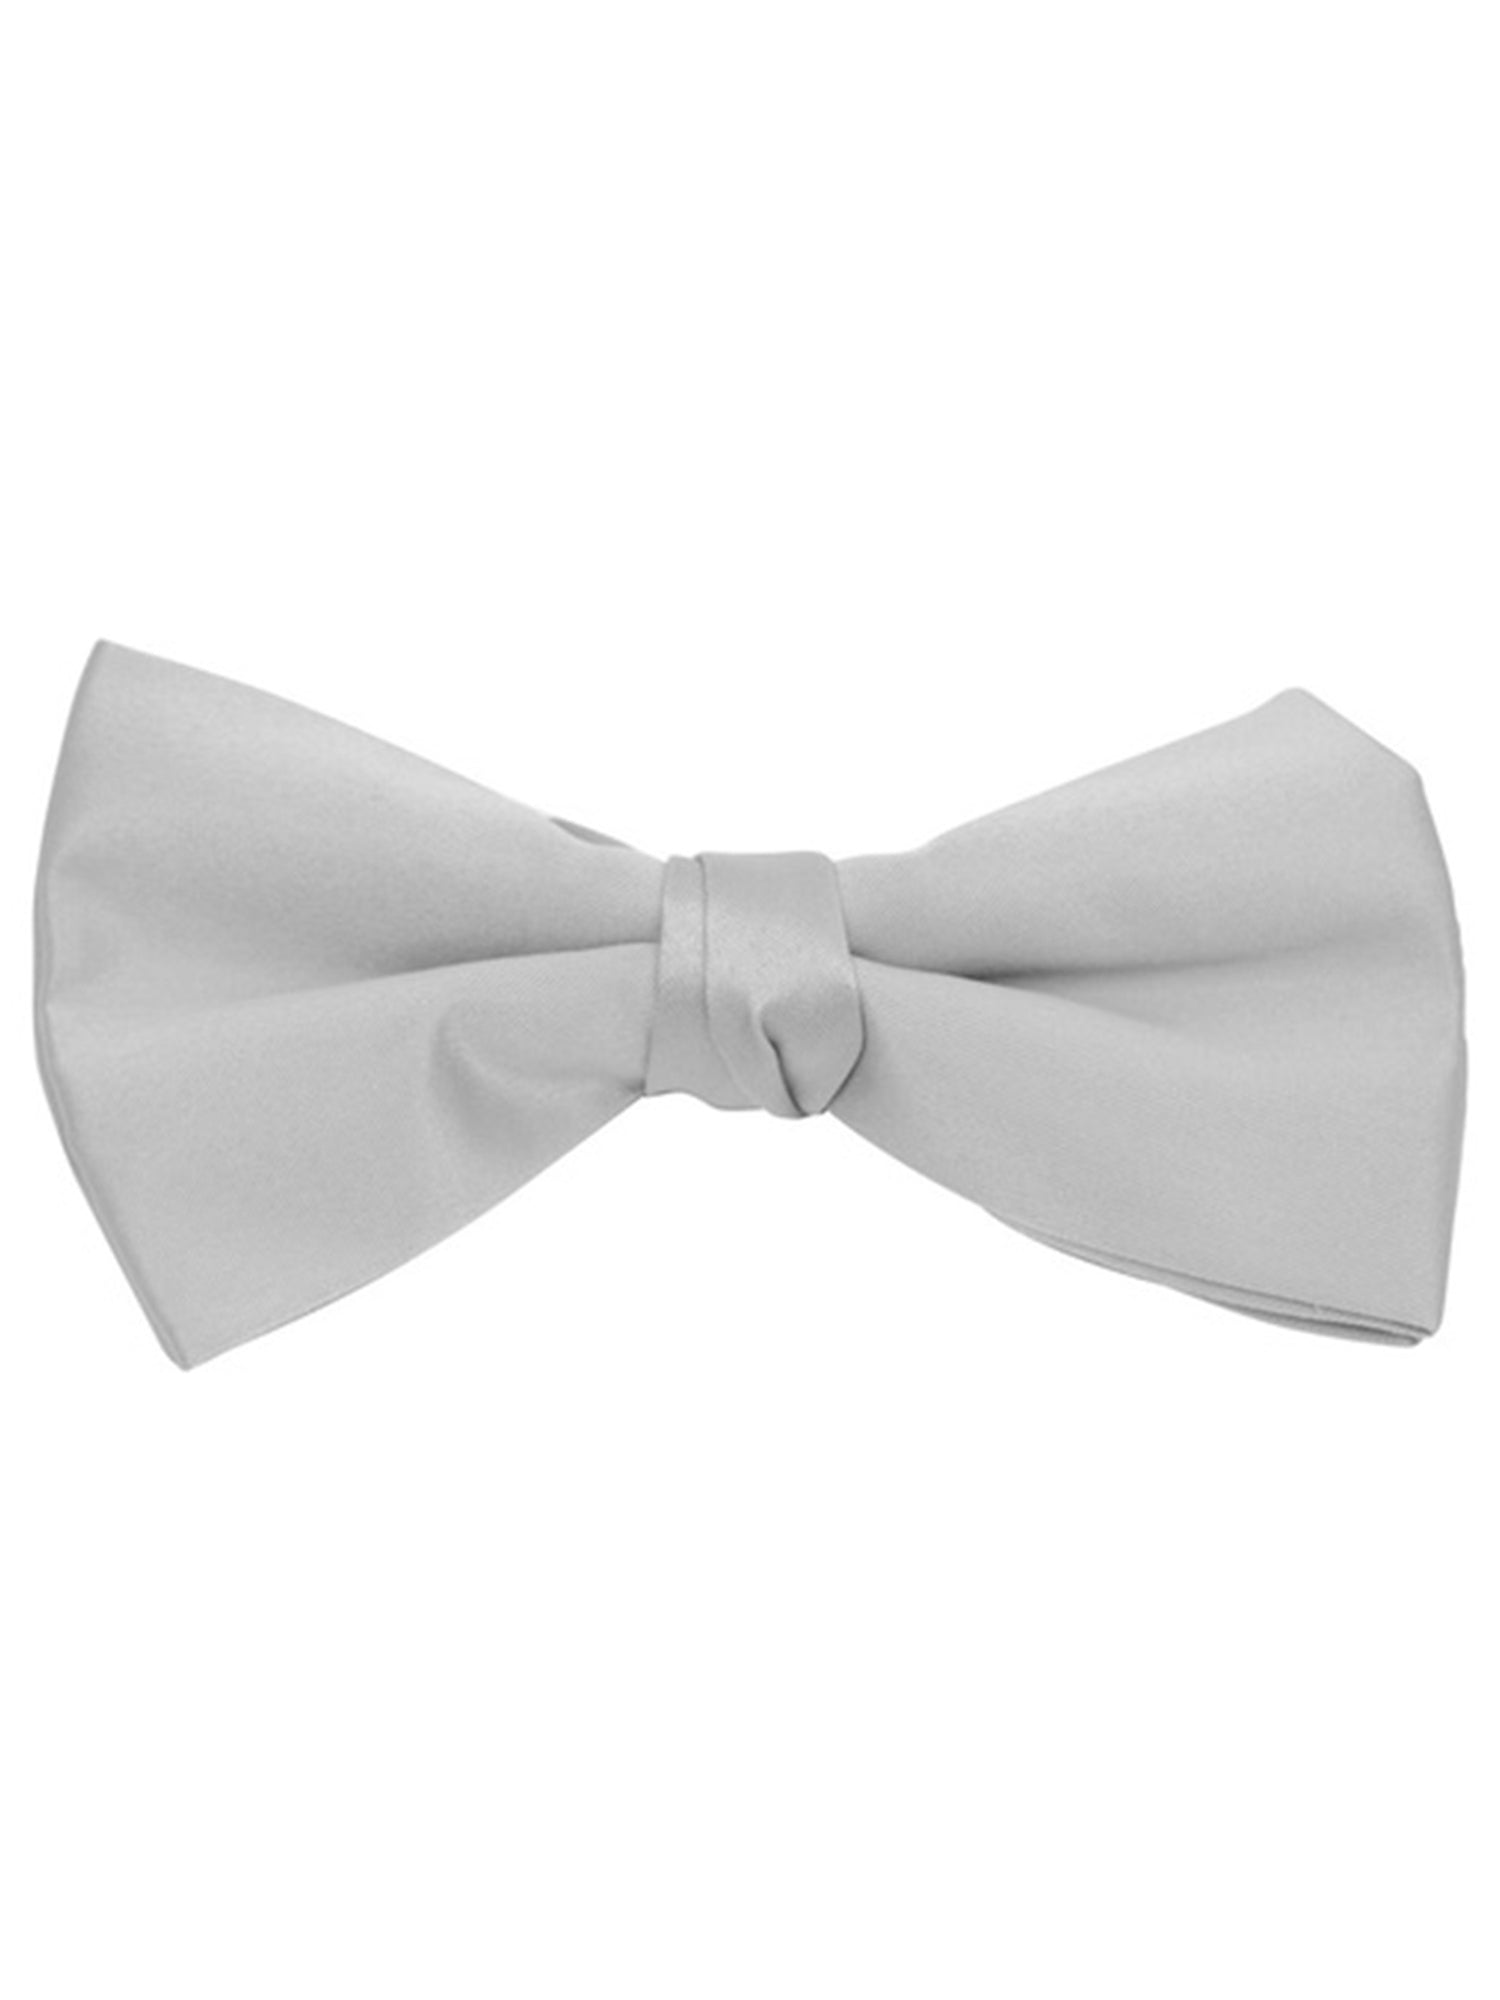 Young Boy's Pre-tied Adjustable Length Bow Tie - Formal Tuxedo Solid Color Boy's Solid Color Bow Tie TheDapperTie Silver One Size 